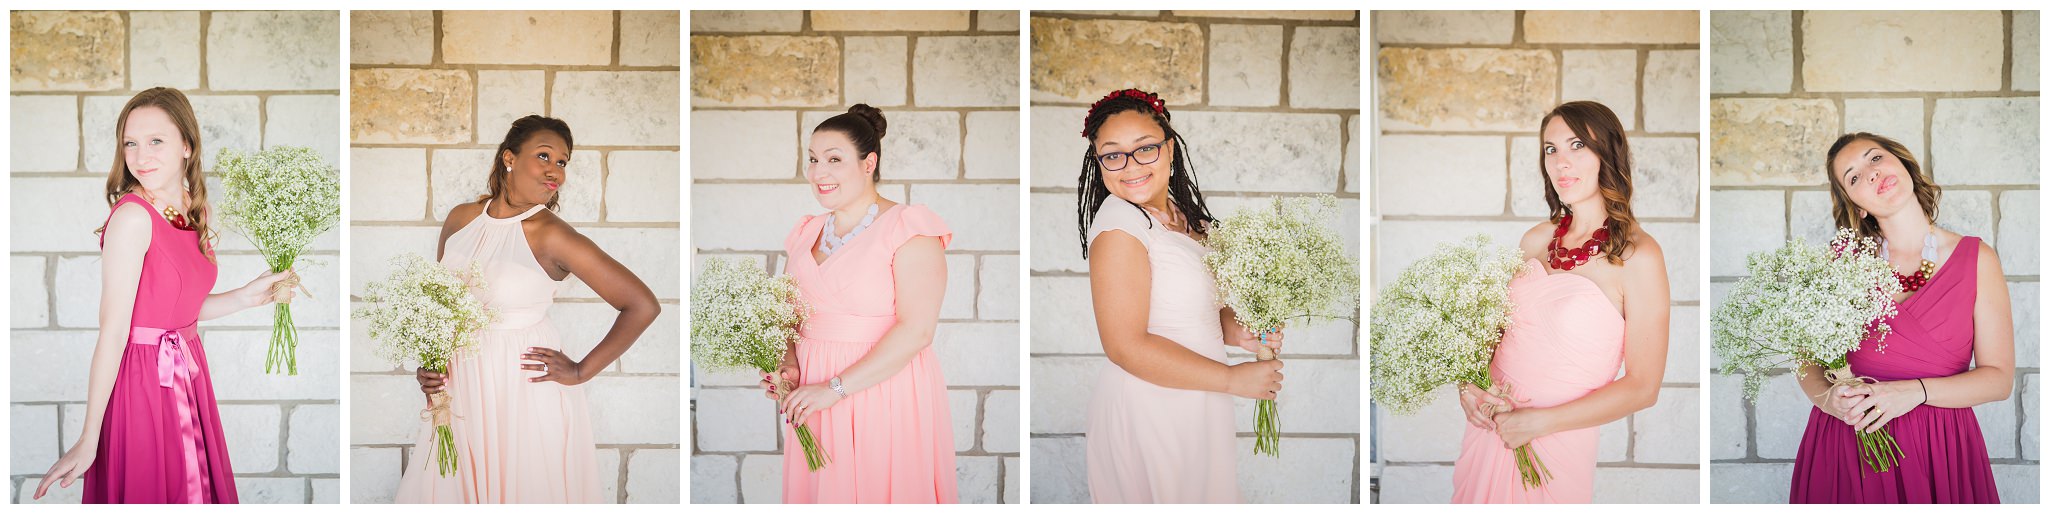 Kerrville Wedding Photographer Unique fun wedding with floral dress 0013